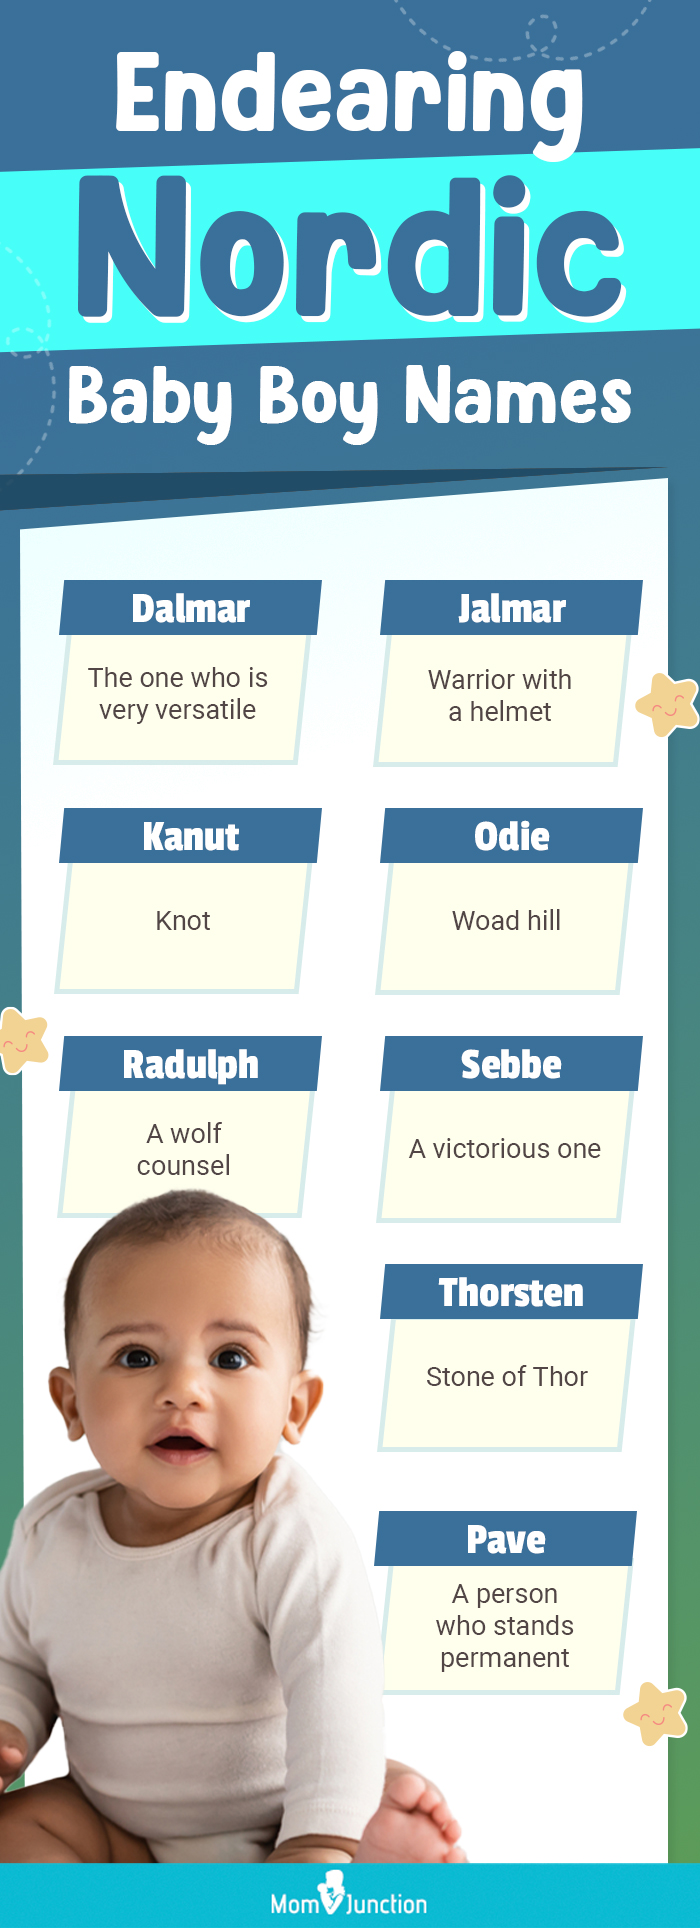 endearing nordic baby boy names (infographic)